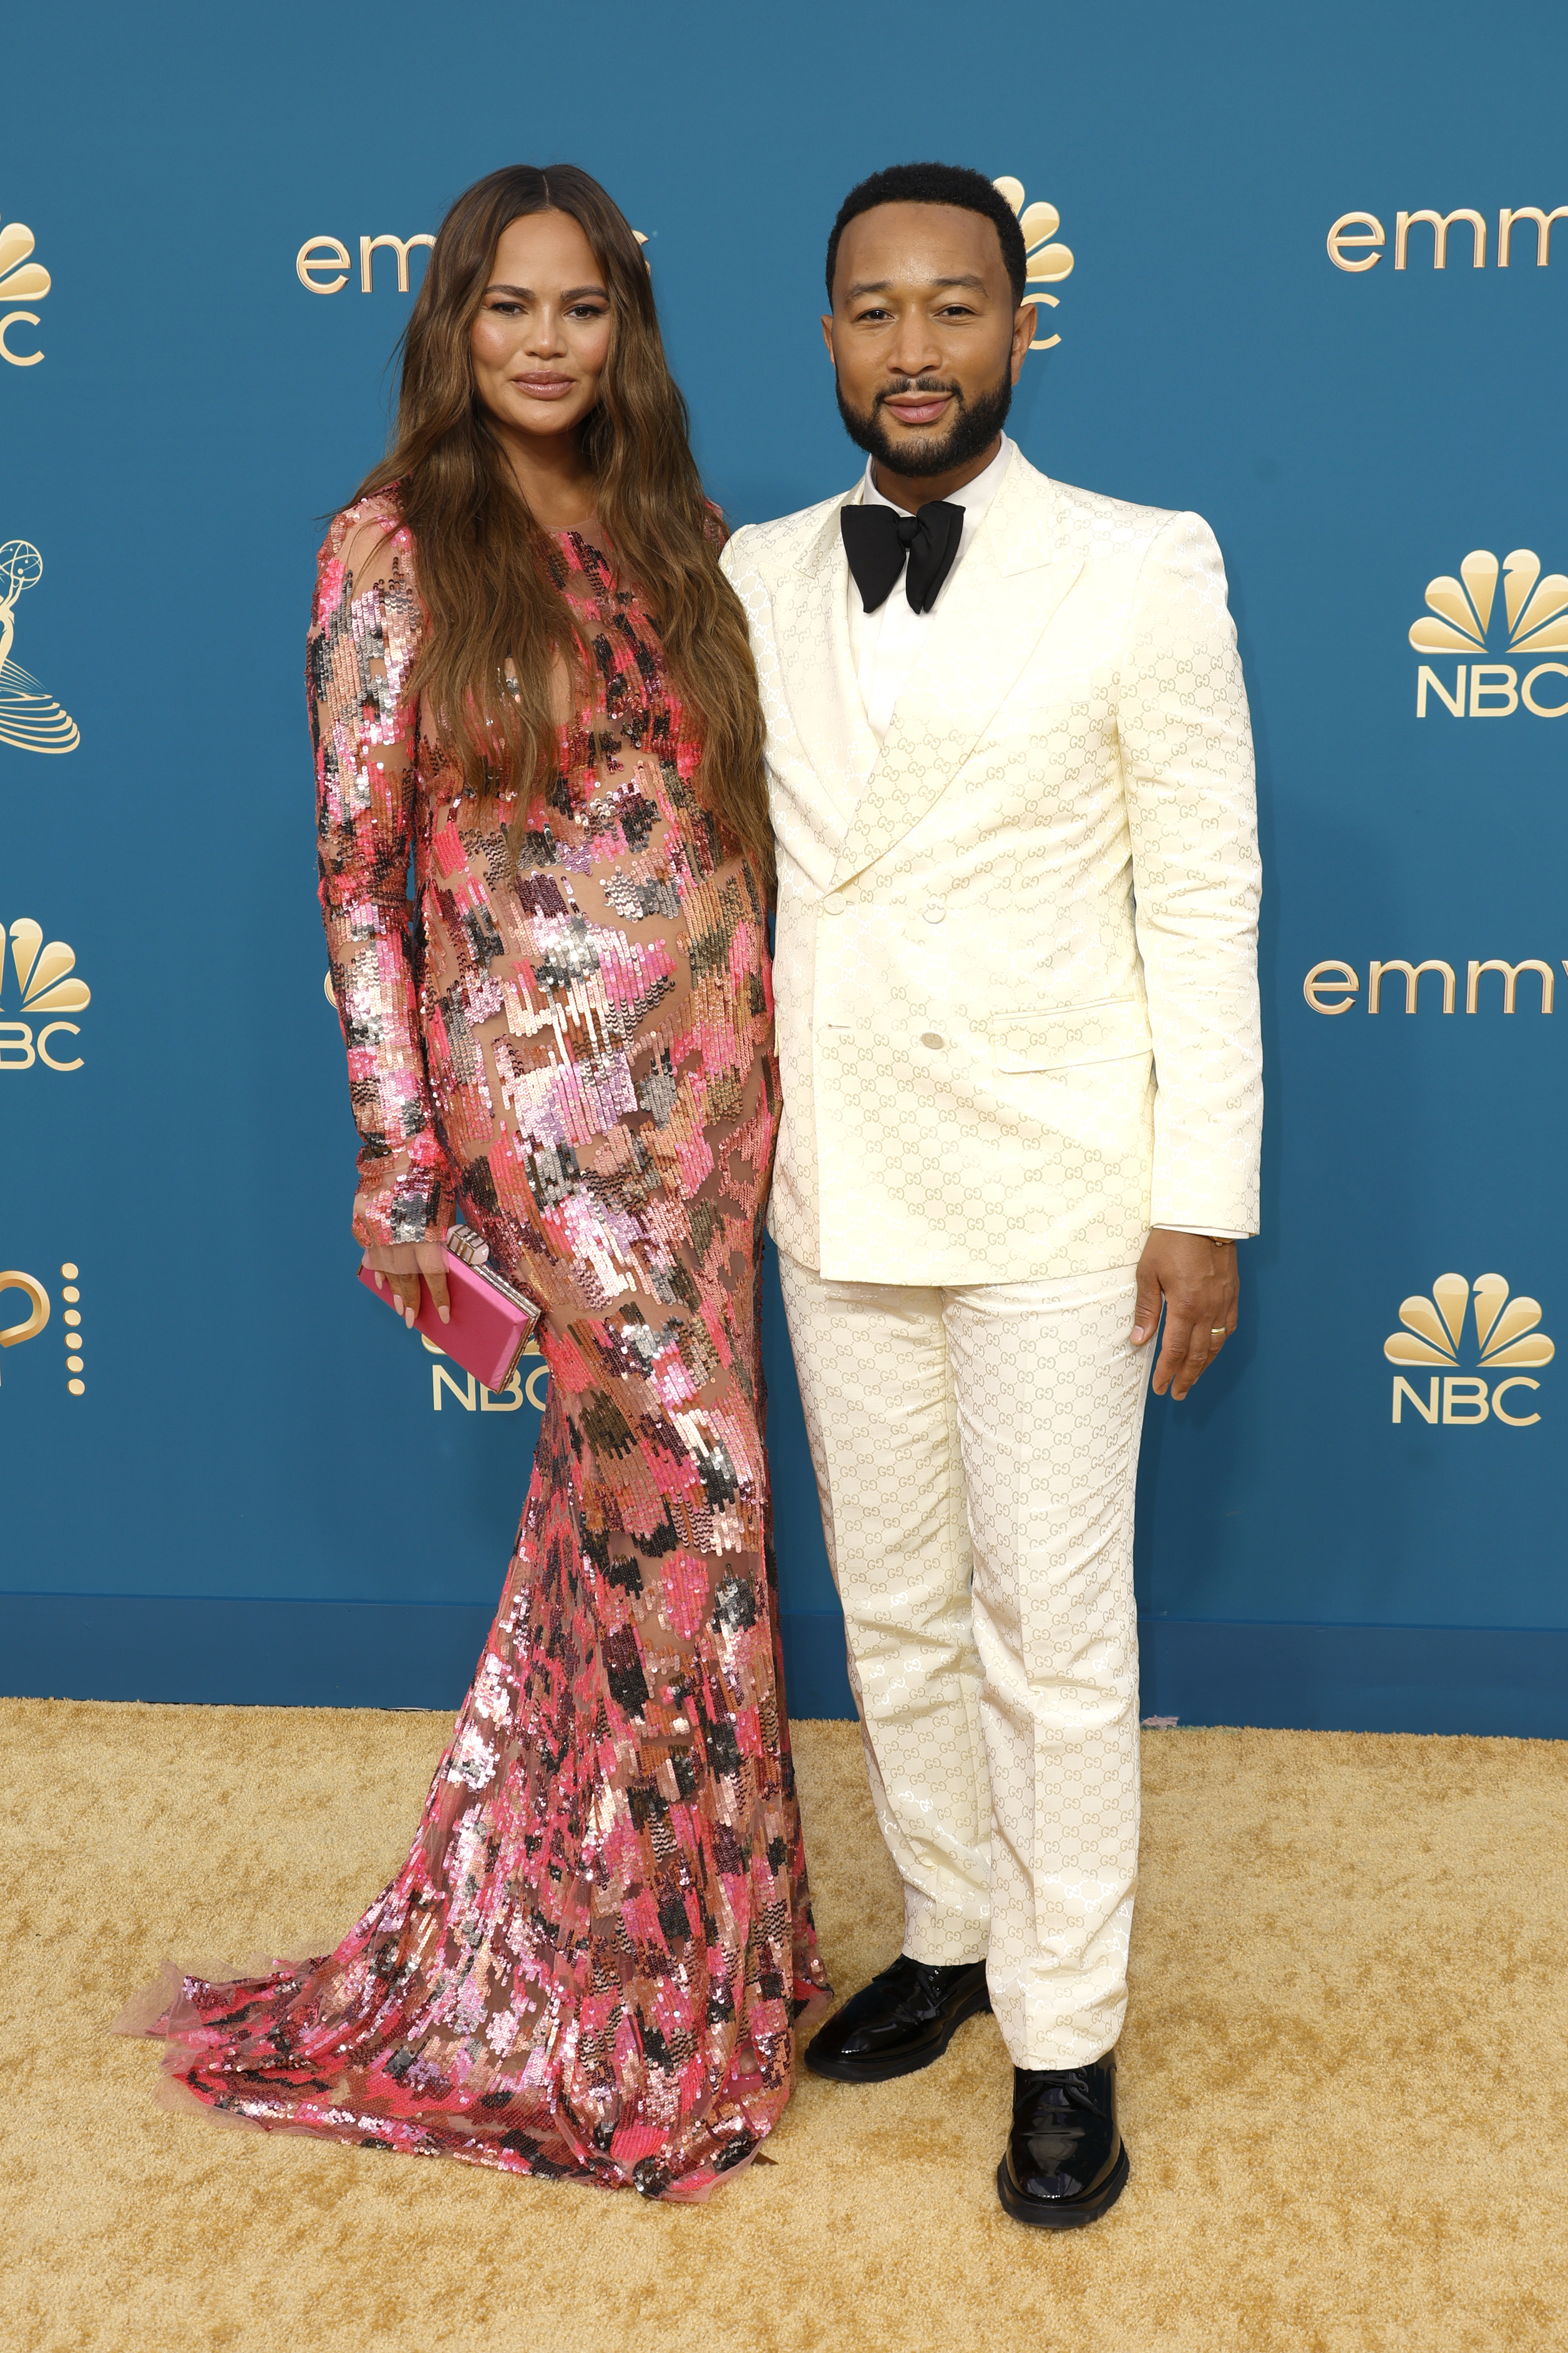 Chrissy Teigen and John Legend attend the 74th Primetime Emmys at Microsoft Theater on September 12, 2022 in Los Angeles, California. | Source: Getty Images